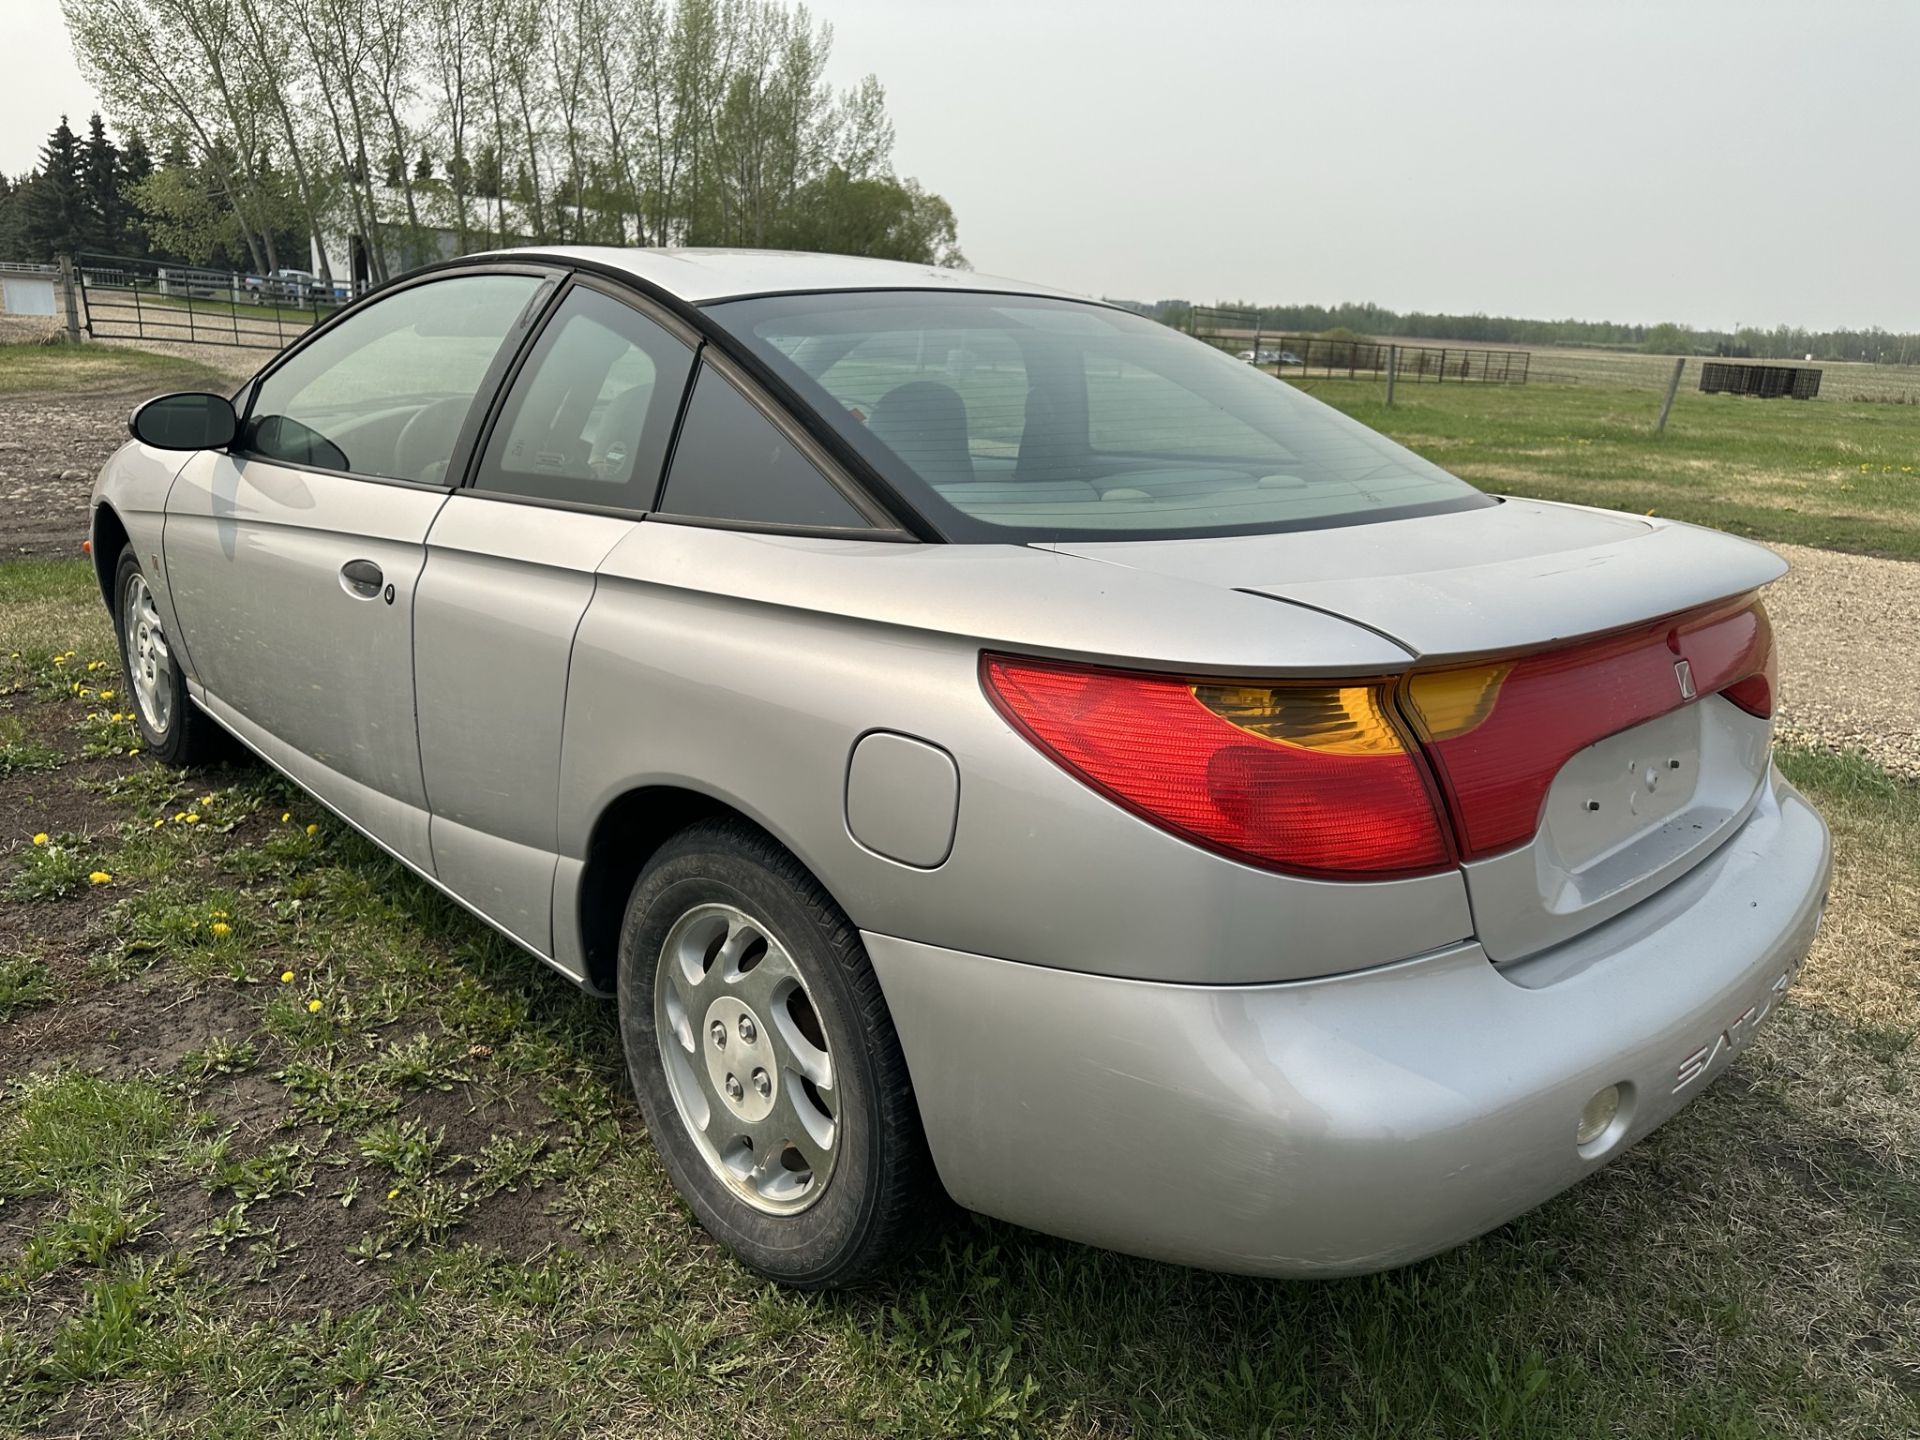 2001 SATURN SL COUPE, 3 DR, AUTO, 118,694 KMS SHOWING, REGISTERED IN AB, S/N 1G82P12851Z243094 ** - Image 4 of 8